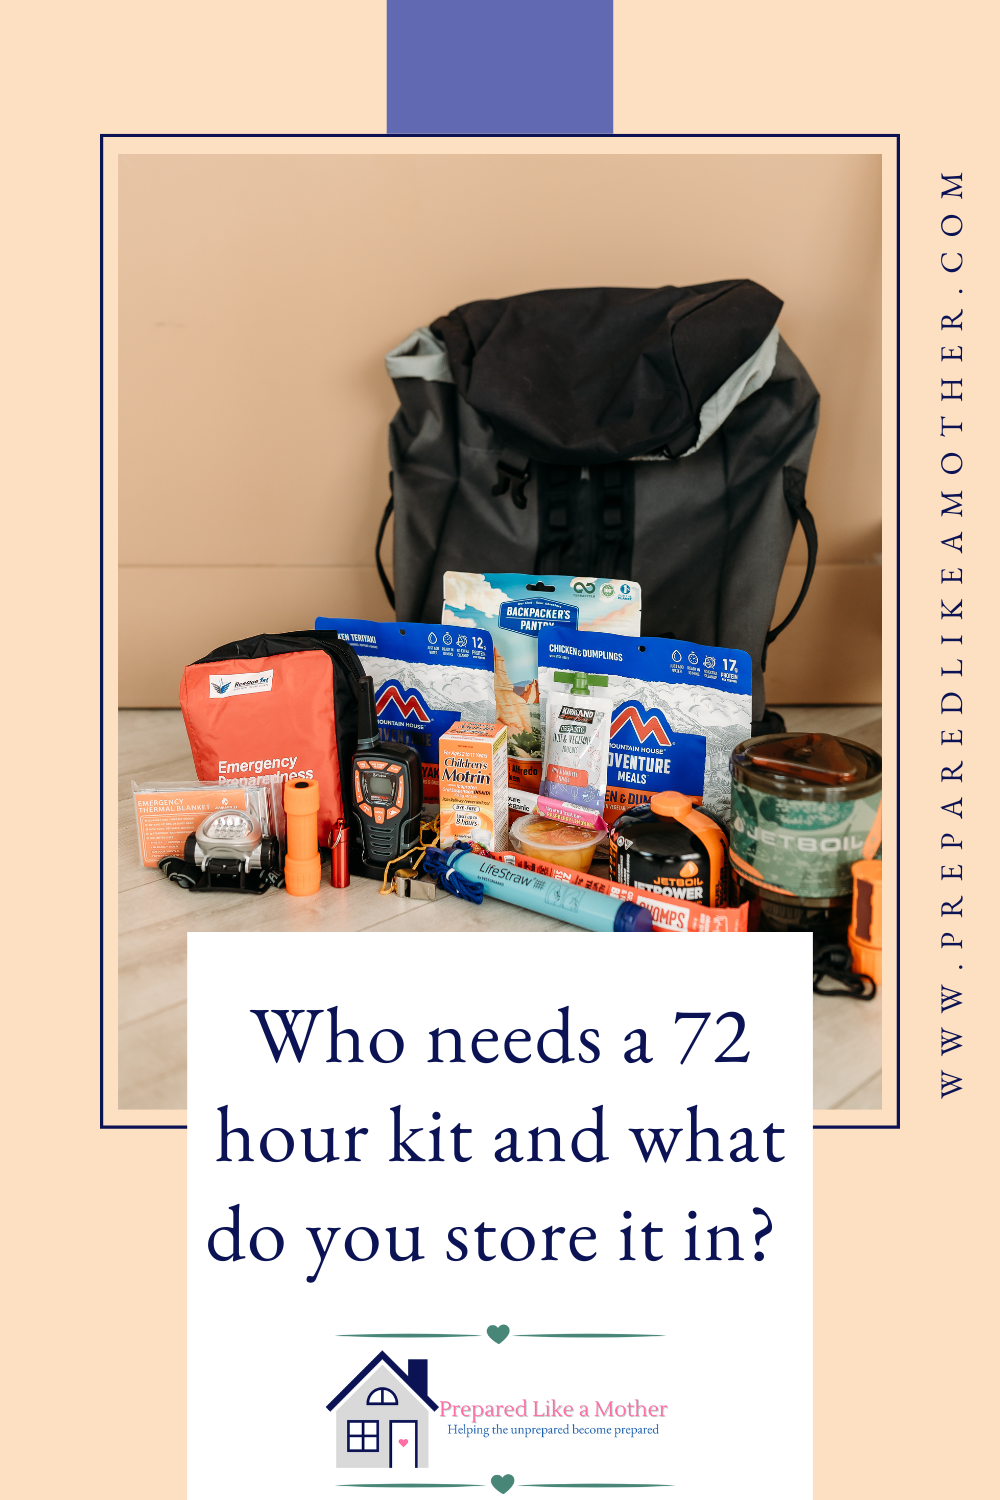 Who needs a 72 hour kit and what do I put it in? — Prepared Like a Mother